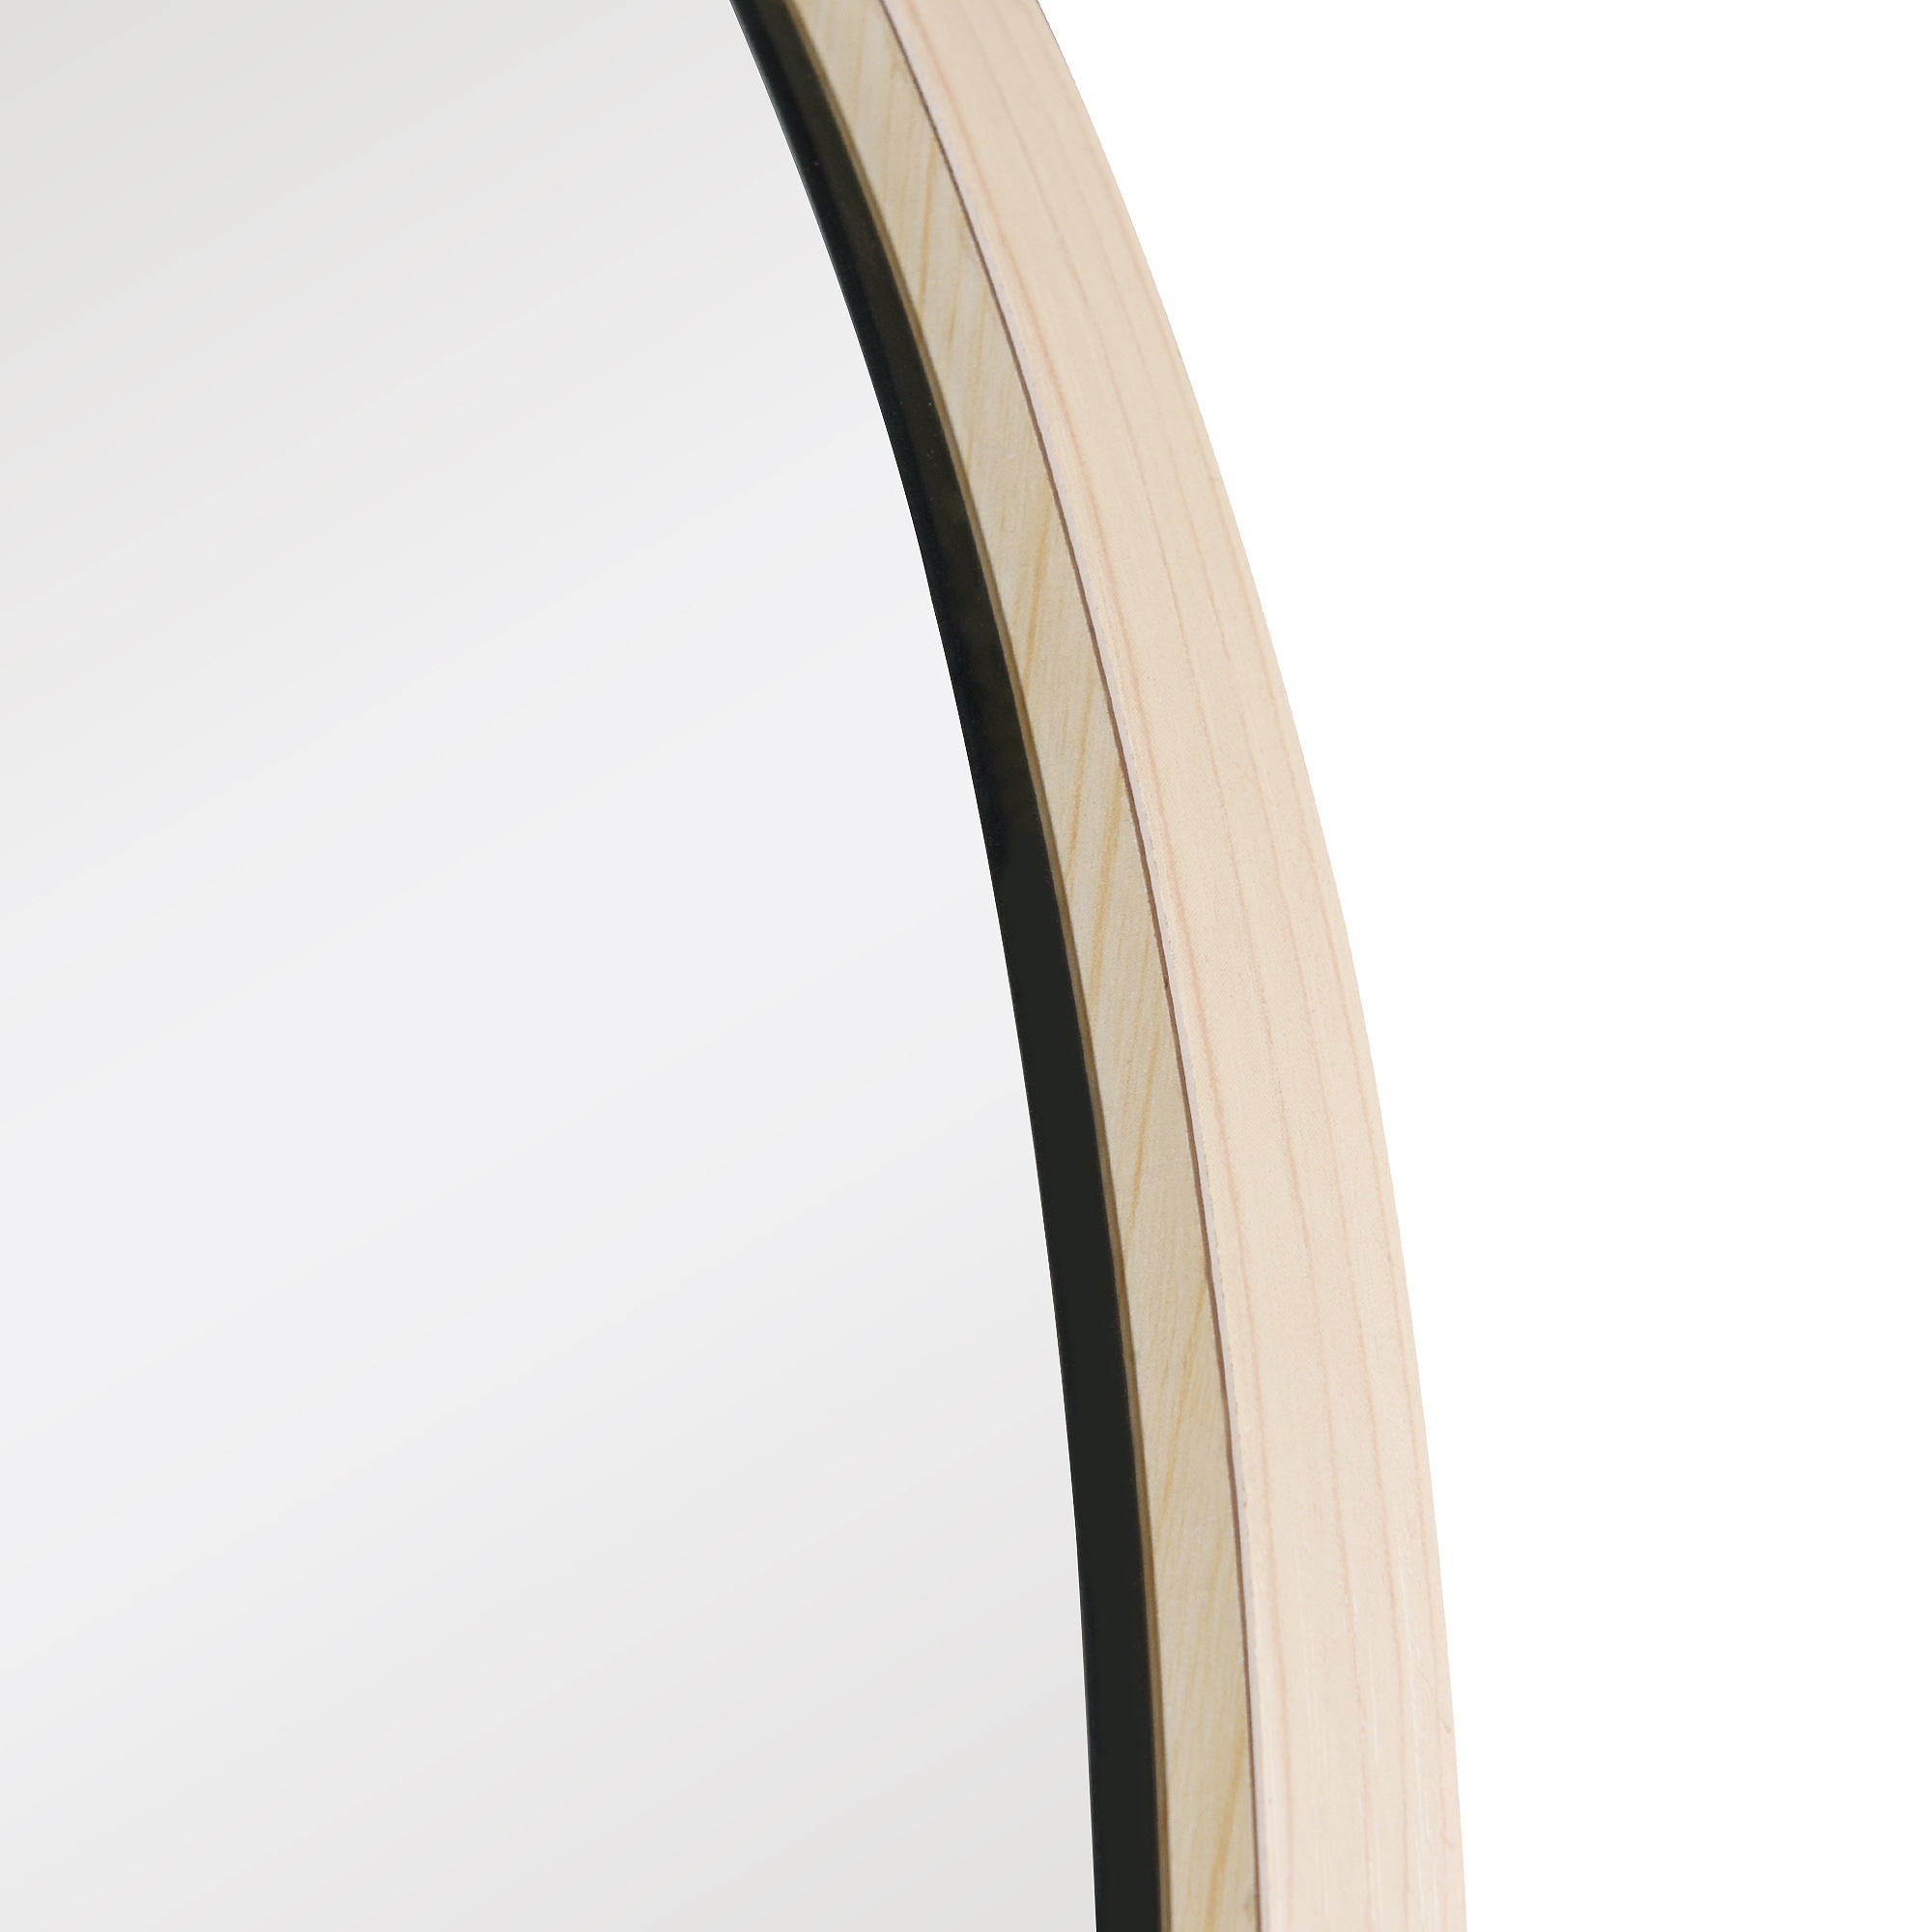 Arched Full Length Floor Wall Mirror Standing Dressing Mirror On Sale  Bed Bath  Beyond 36264577